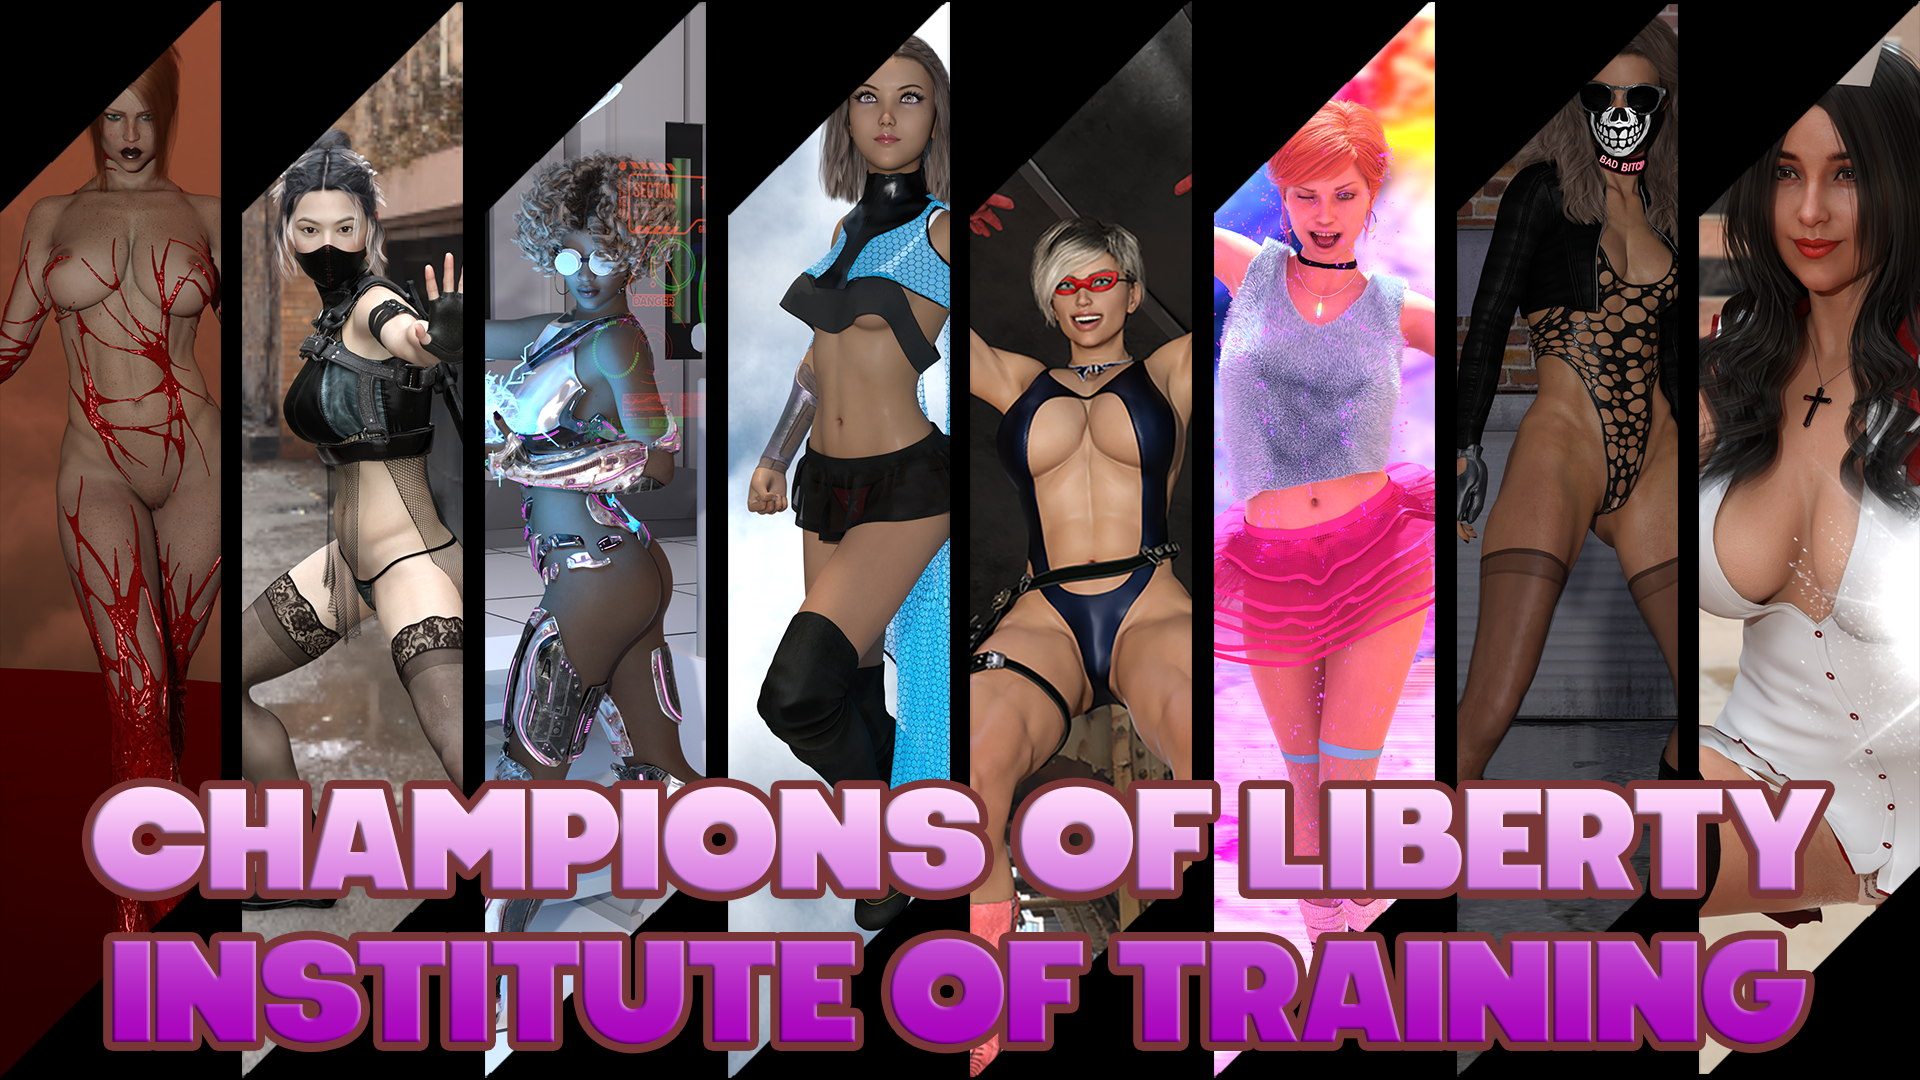 Champions of Liberty Institute of Training ( Version 0.6 )